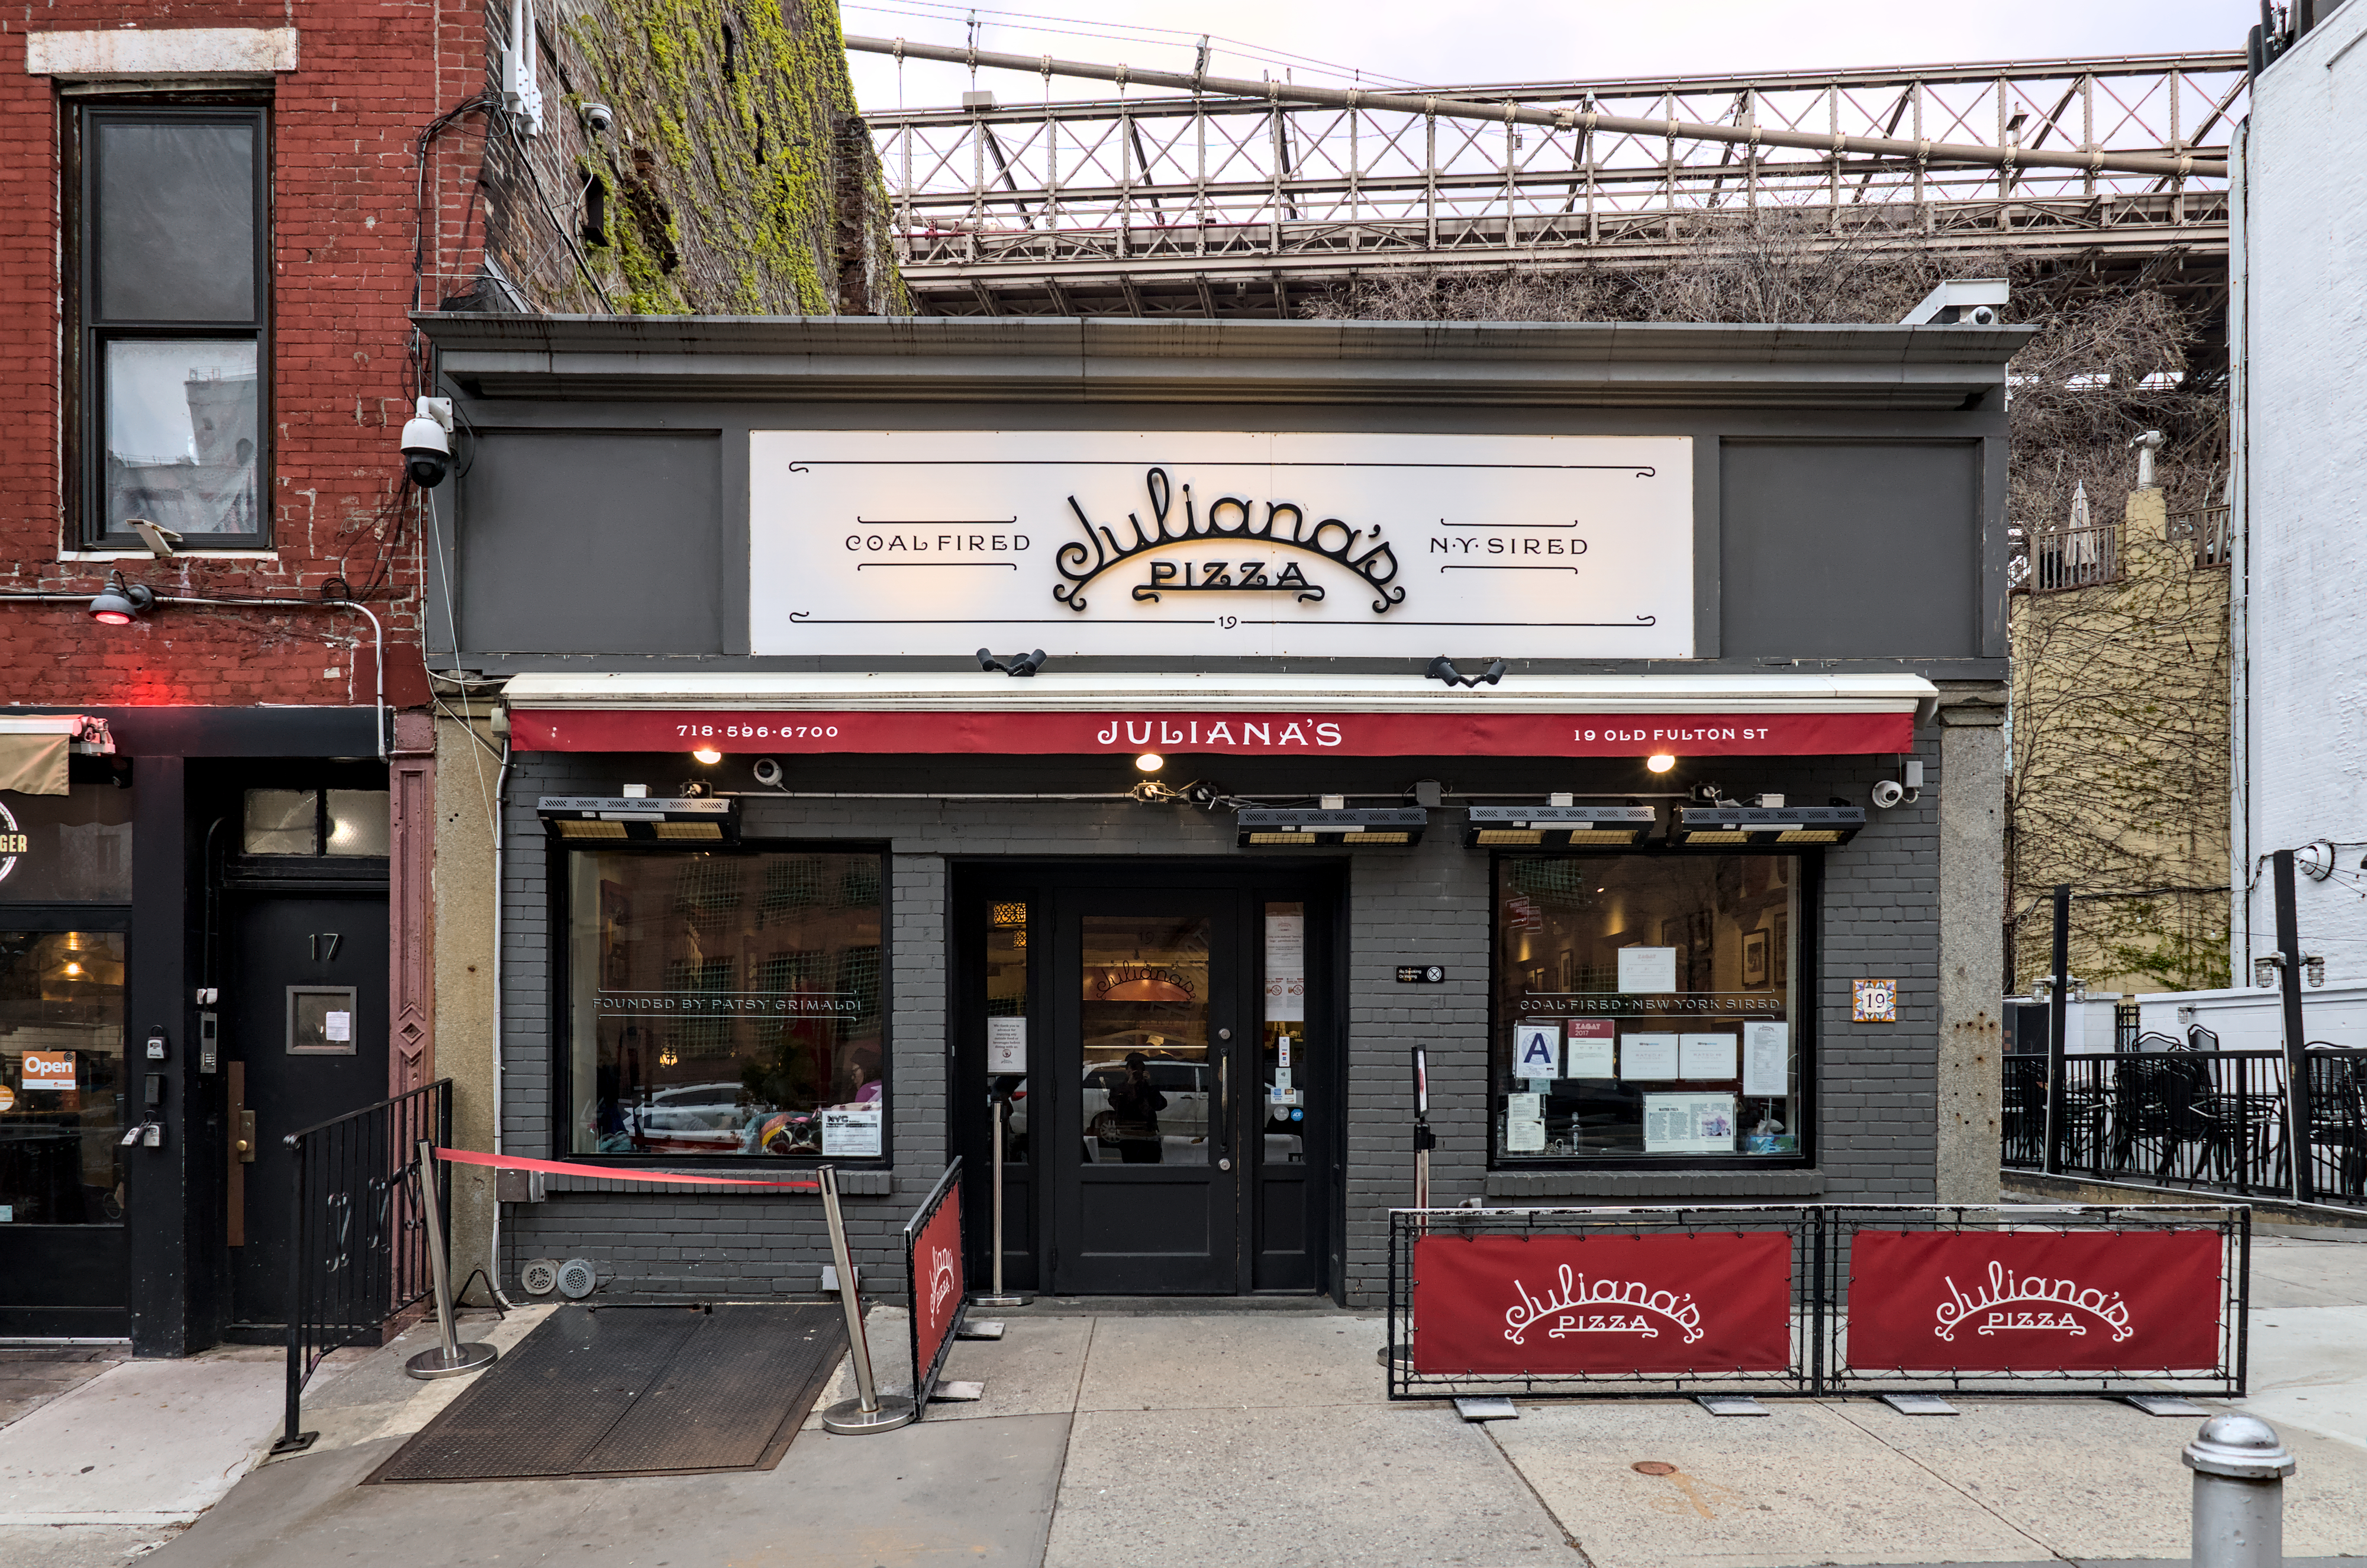 Exterior view of Juliana&#x27;s Pizza under a bridge, with signage, outdoor seating, and dual entrance doors